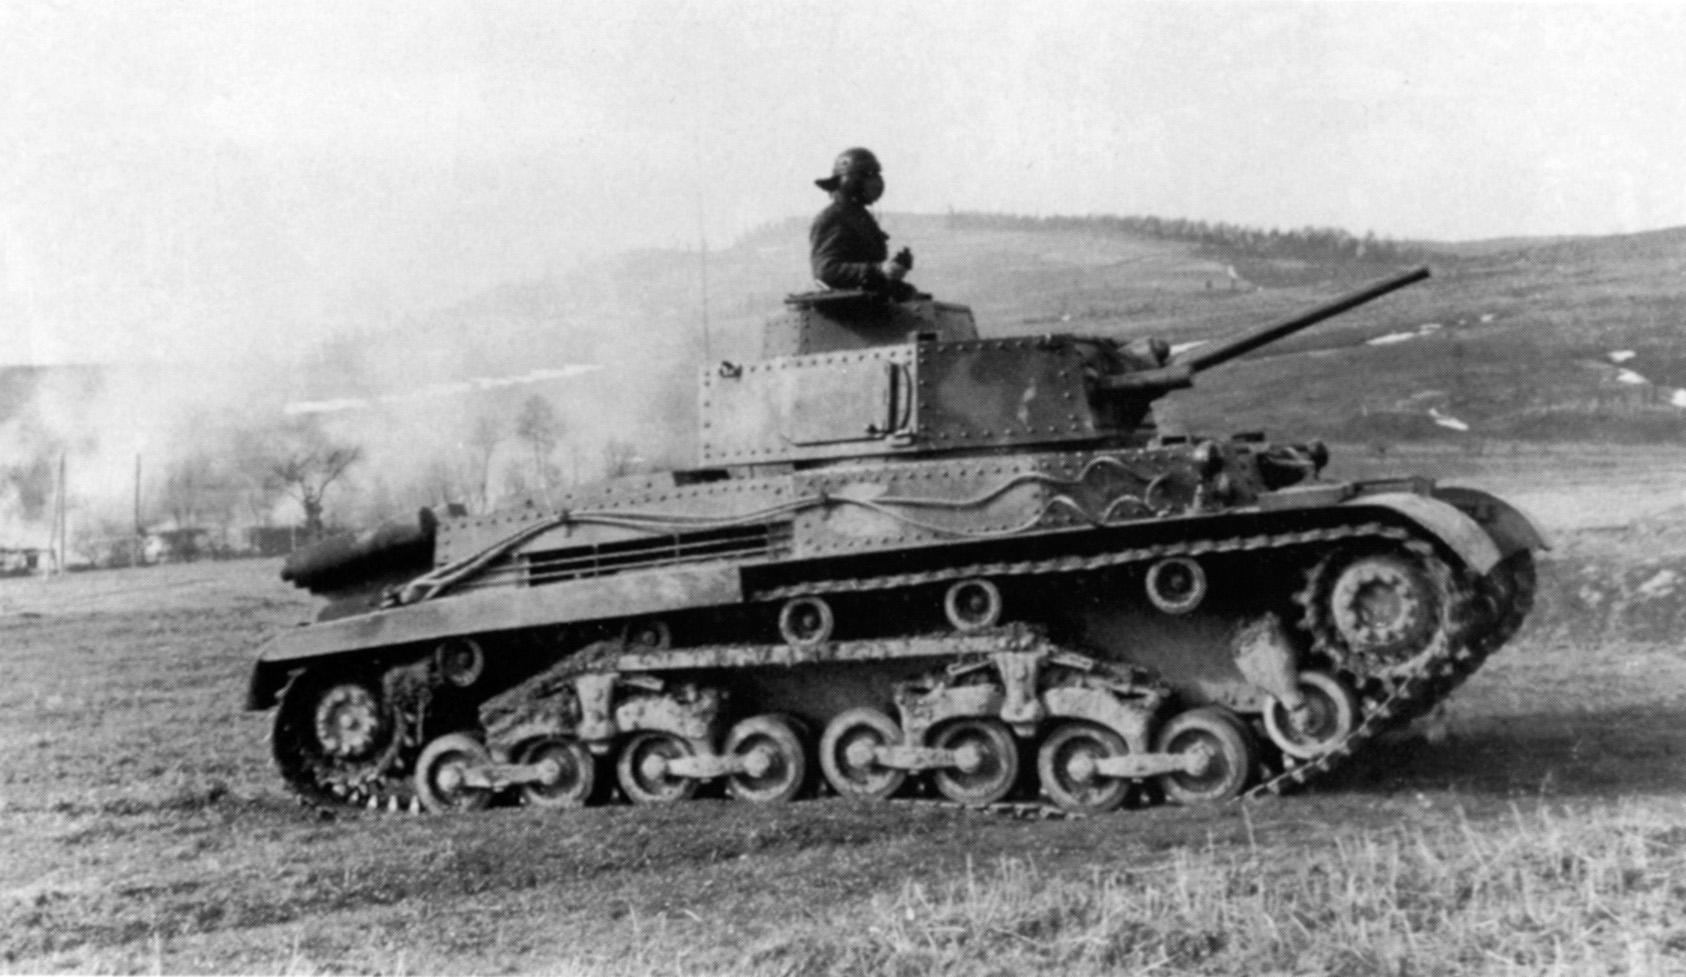 The Hungarian-made Turan I was a 16-ton medium tank whose construction was based on a design from the Skoda Works in Czechoslovakia. Later in the war, its firepower would be considered negligible in clashes between armored units. 